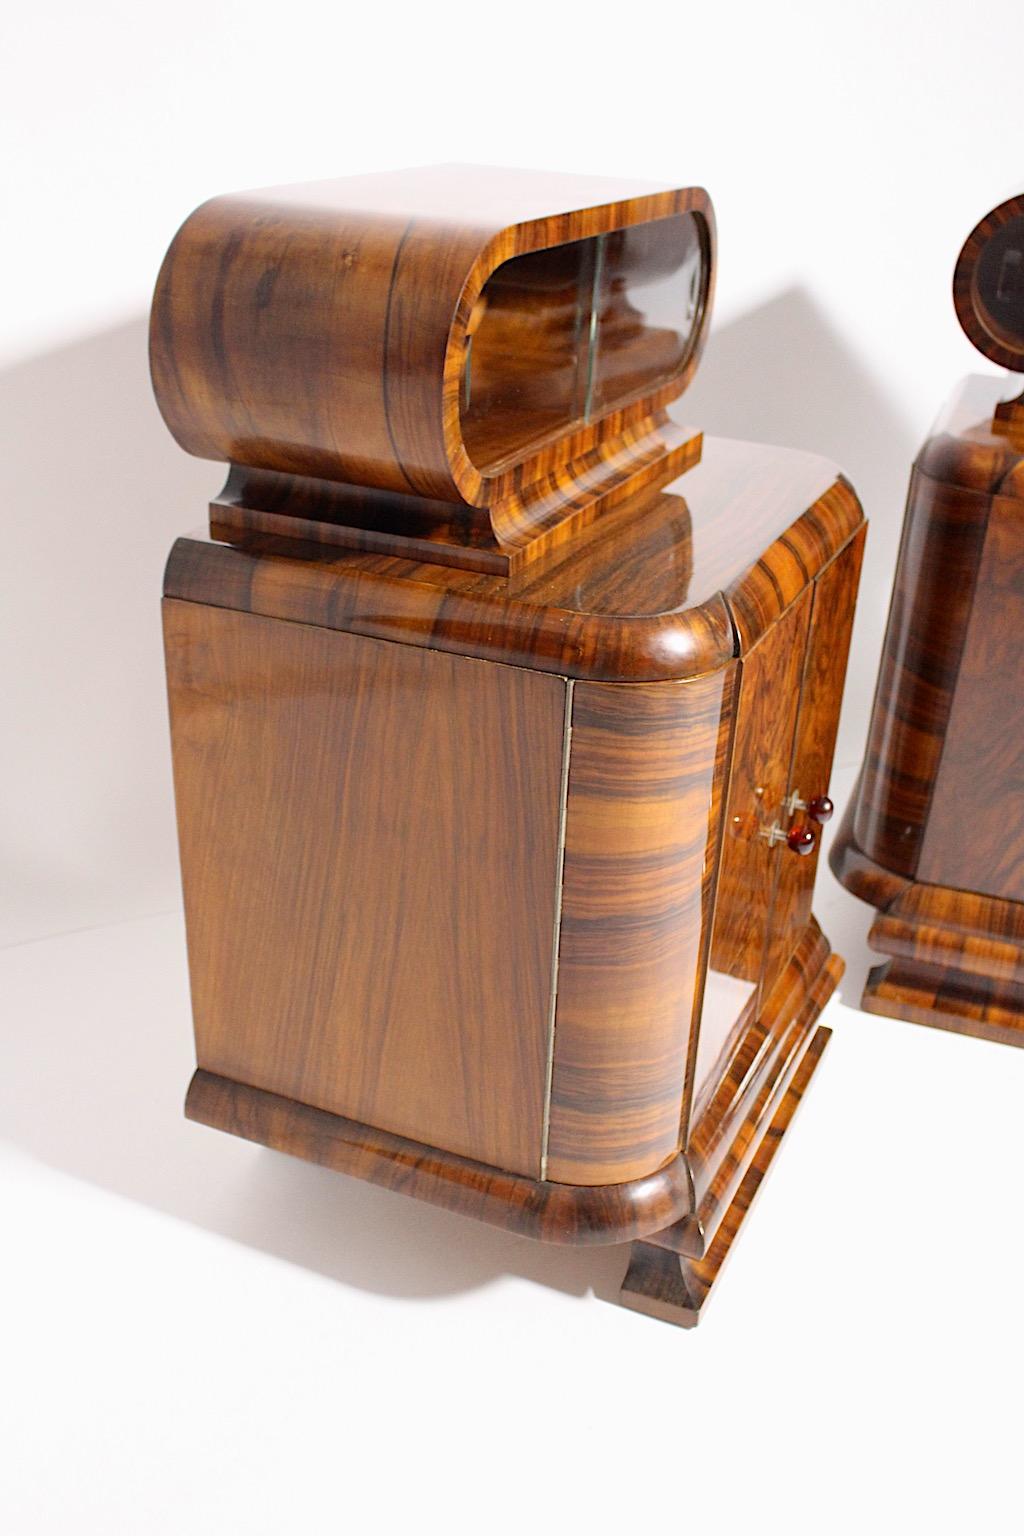 Art Deco Walnut Vintage Pair of Nightstands or Chests or Commodes 1930s Vienna For Sale 2